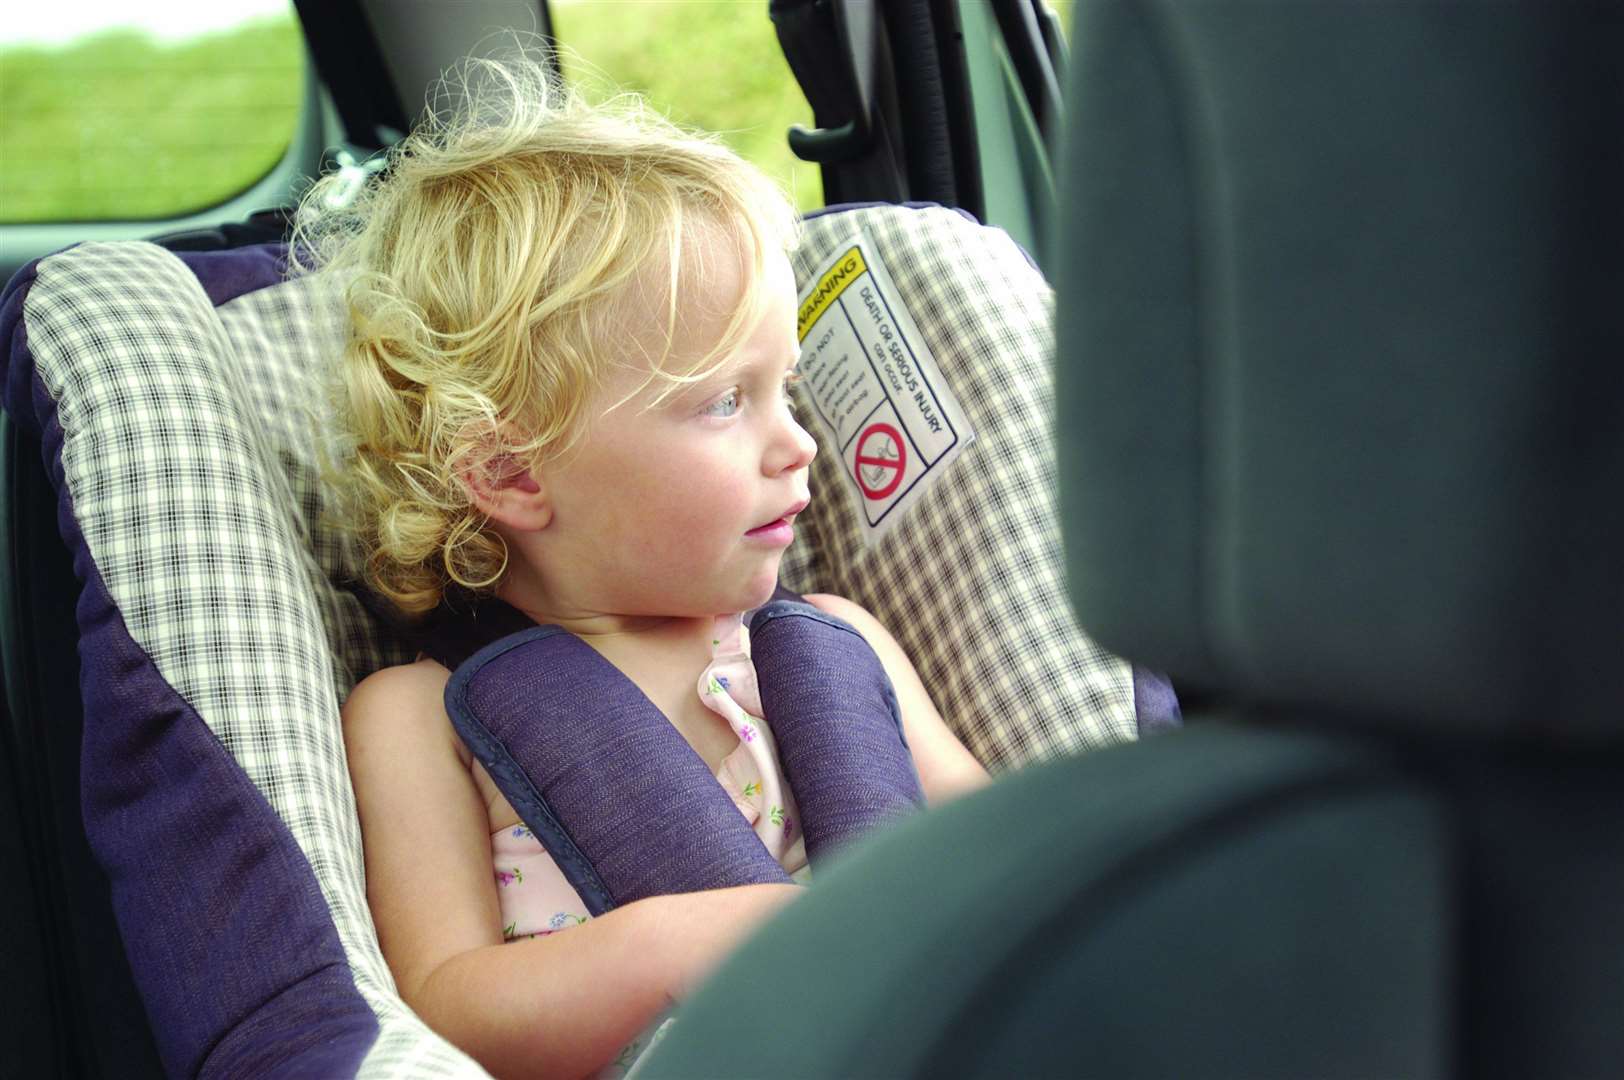 Car seats loaned to grandparents or other friends and family should also be regularly checked